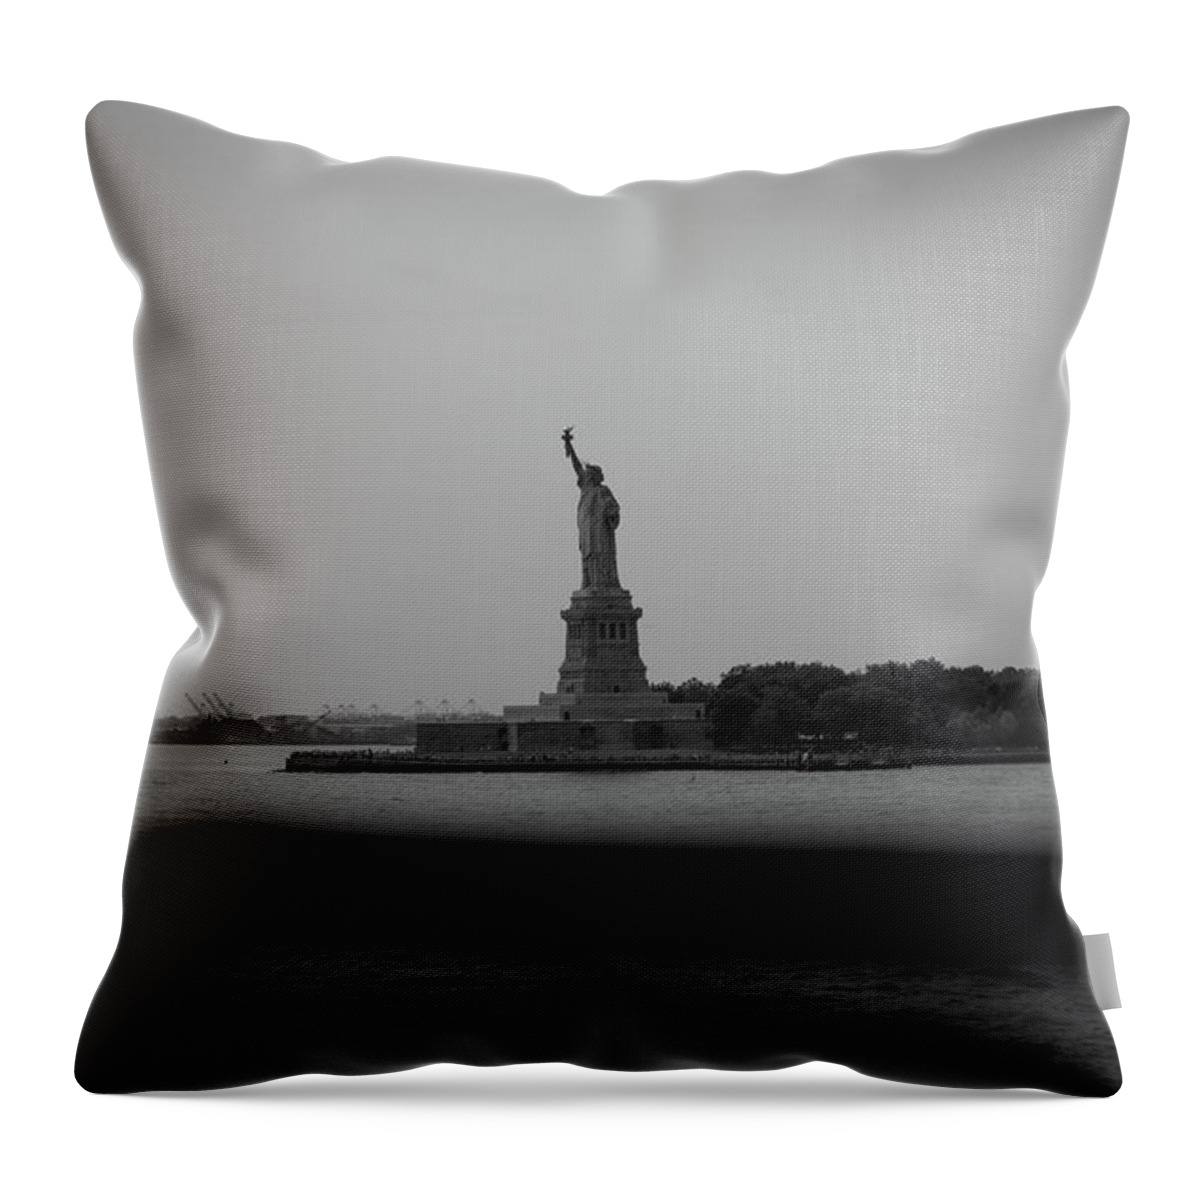 Lady Liberty Throw Pillow featuring the photograph Window To Liberty by David Sutton